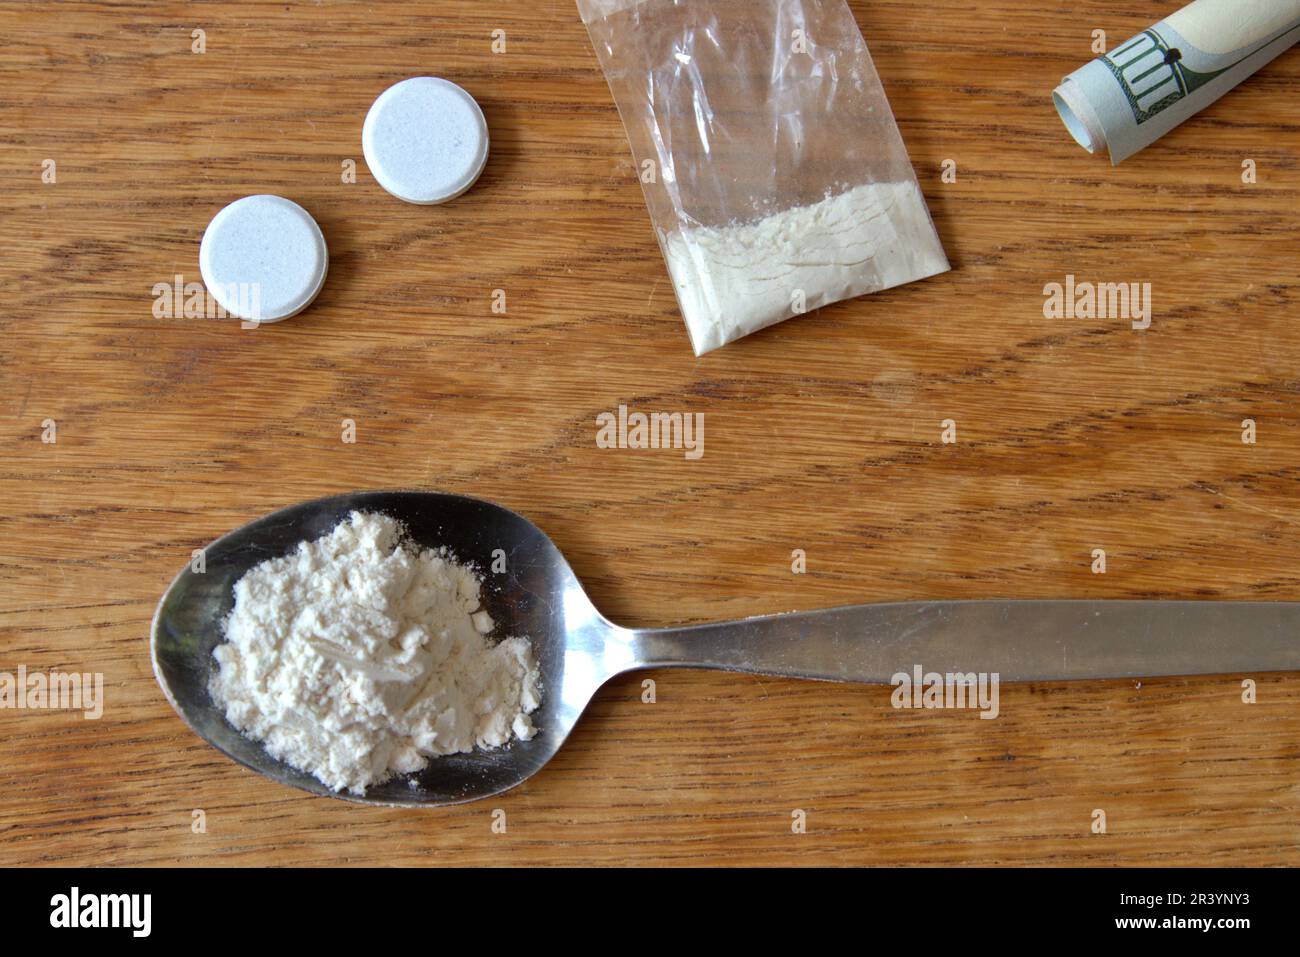 Illegal drugs laid out on a table Stock Photo